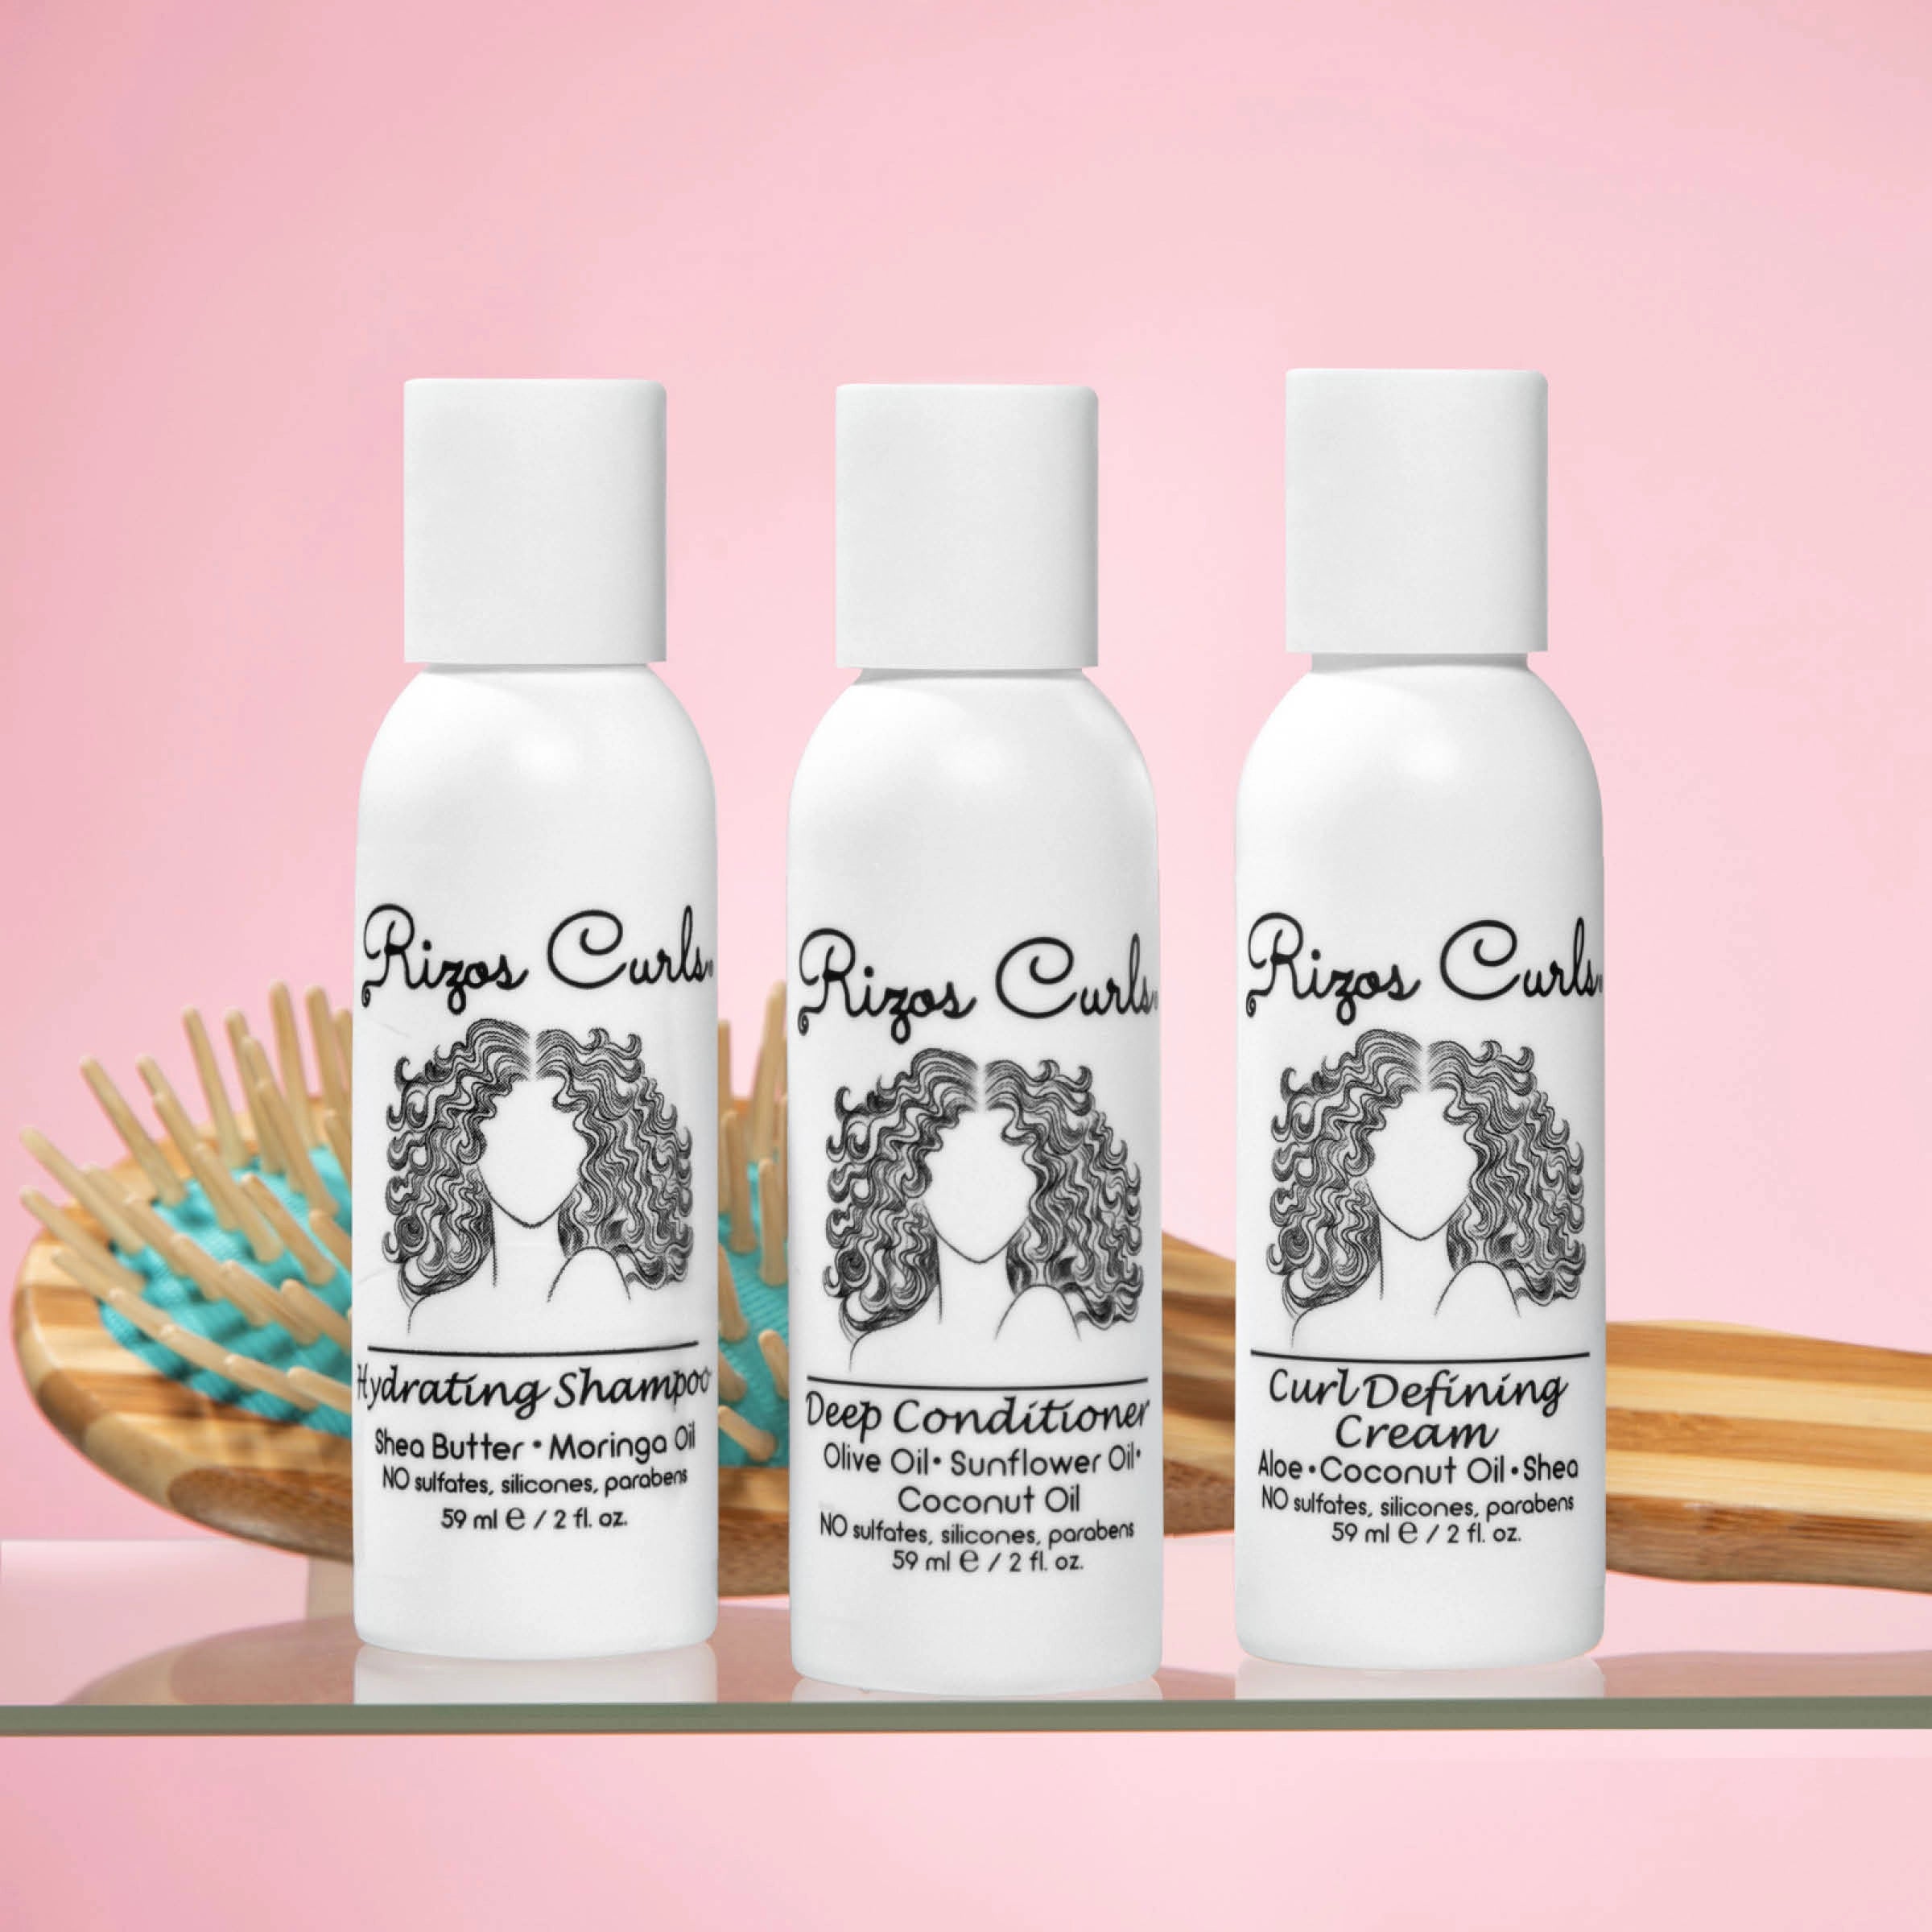 Control Travel Size Kit: Shampoo, Conditioner, and Styling Cream